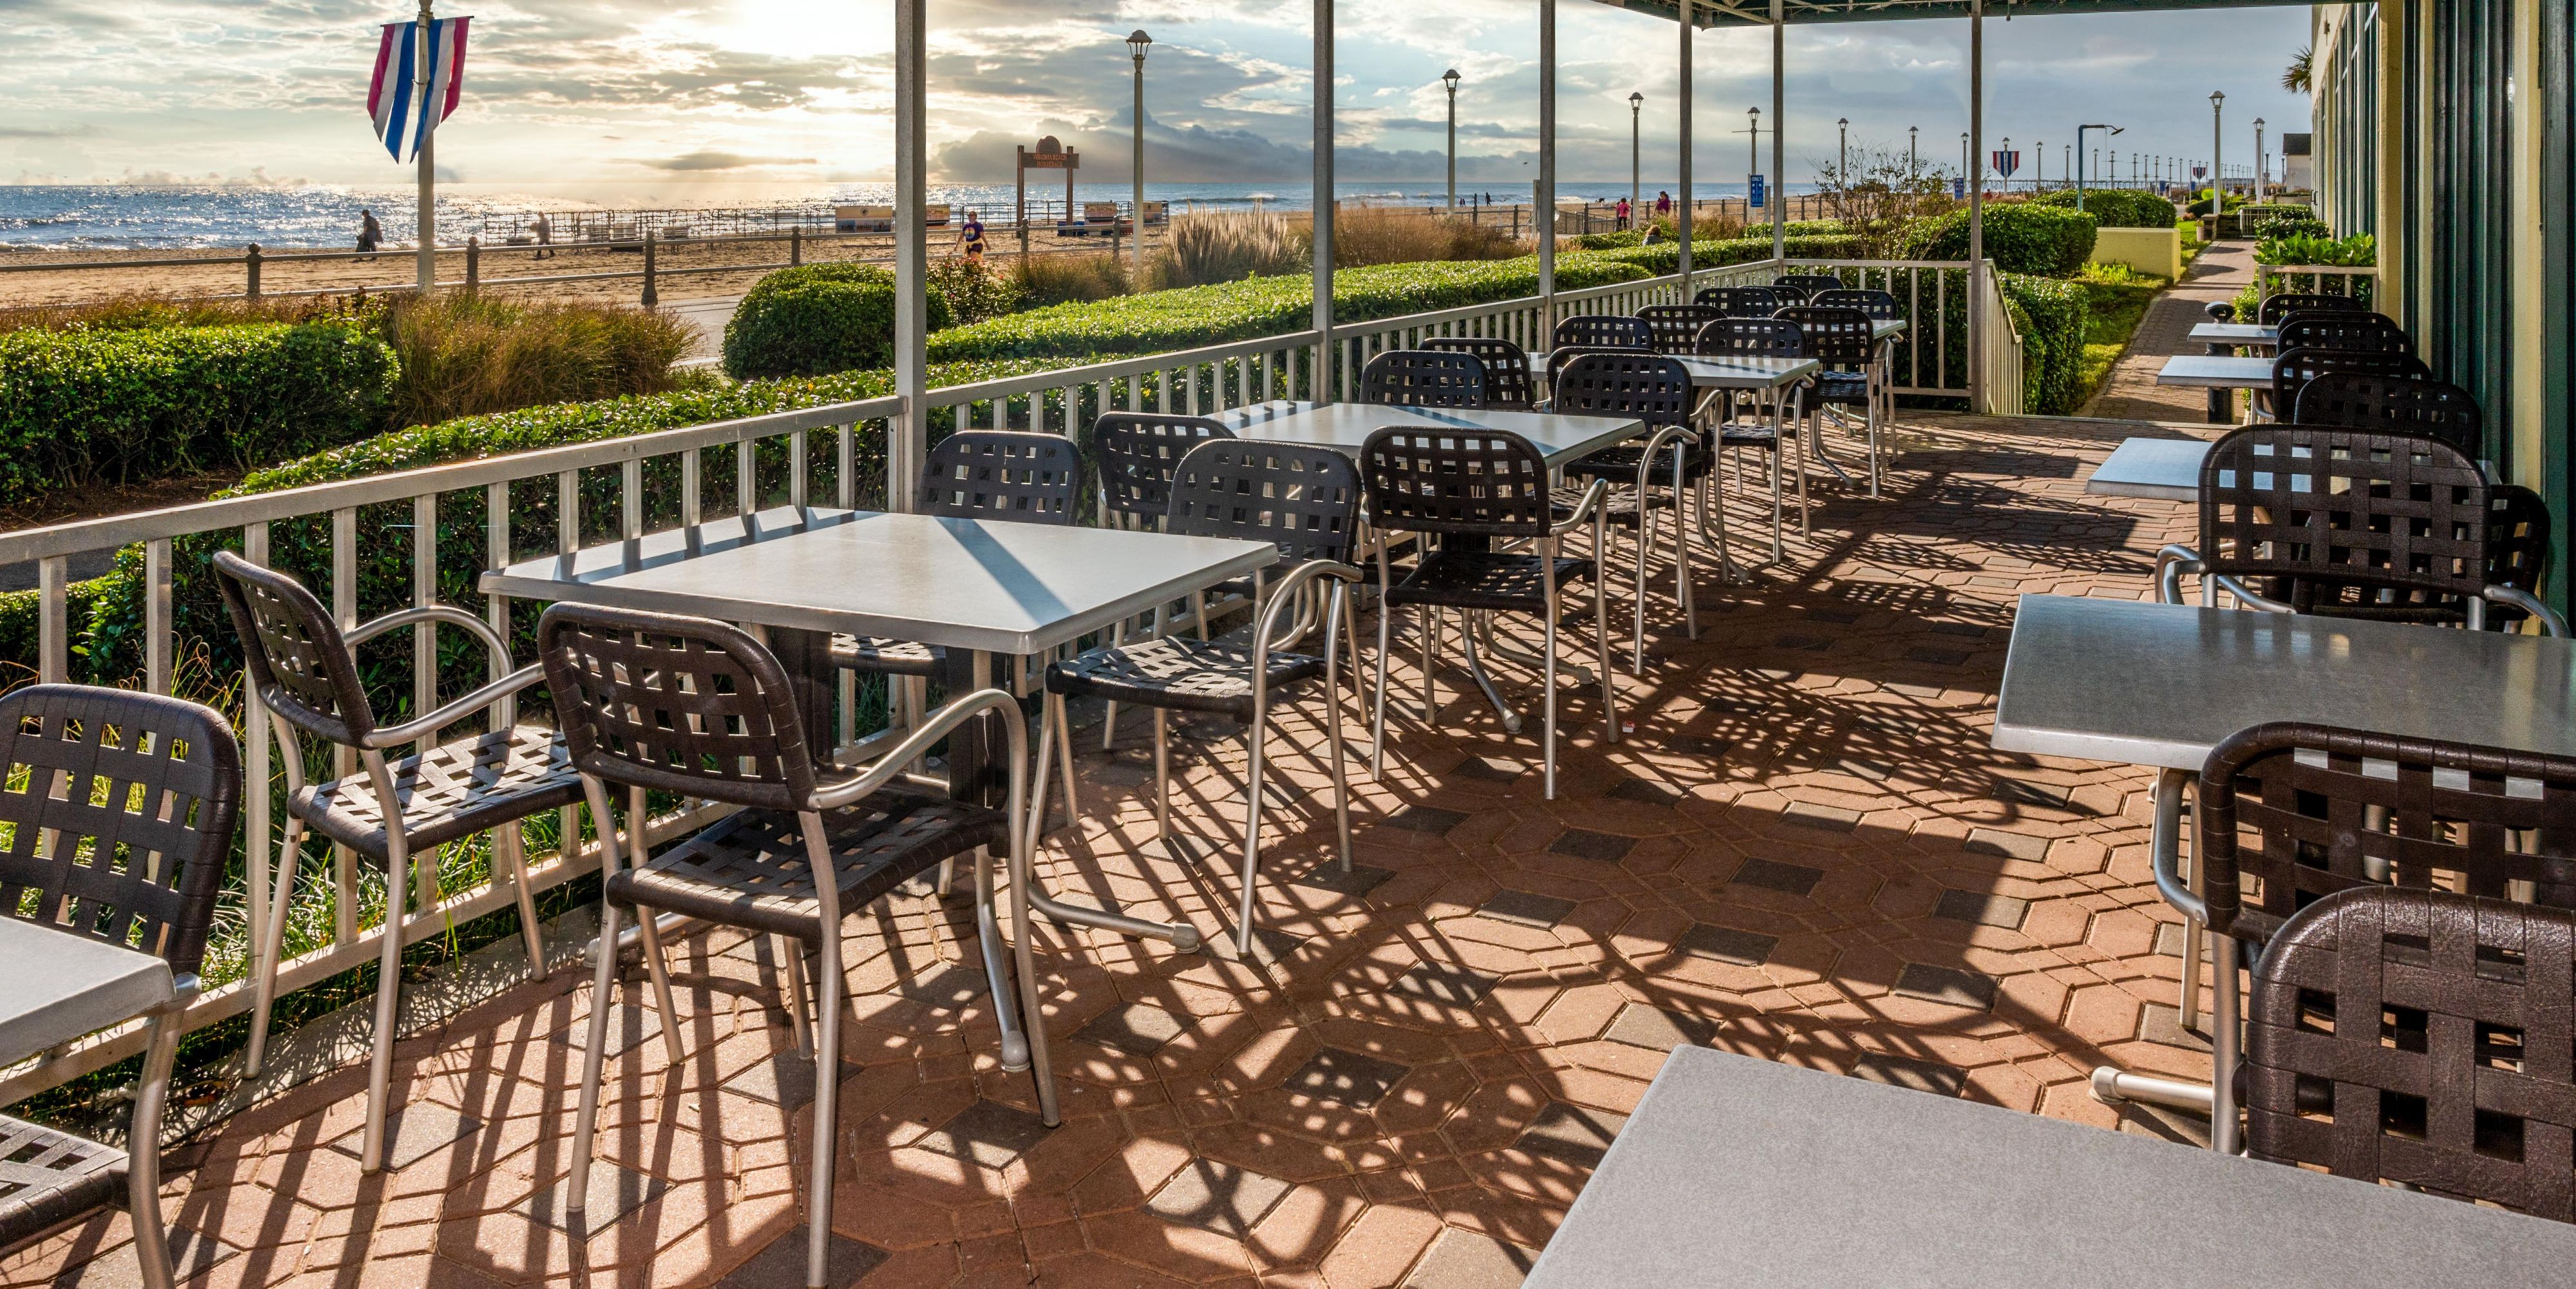 Enjoy our outdoor patio with a beautiful view of the Atlantic Ocean. The patio is a perfect spot to enjoy the morning sunrise and evening ocean breezes. With seating up to 30 guests, give us a call to book the patio for your next event.